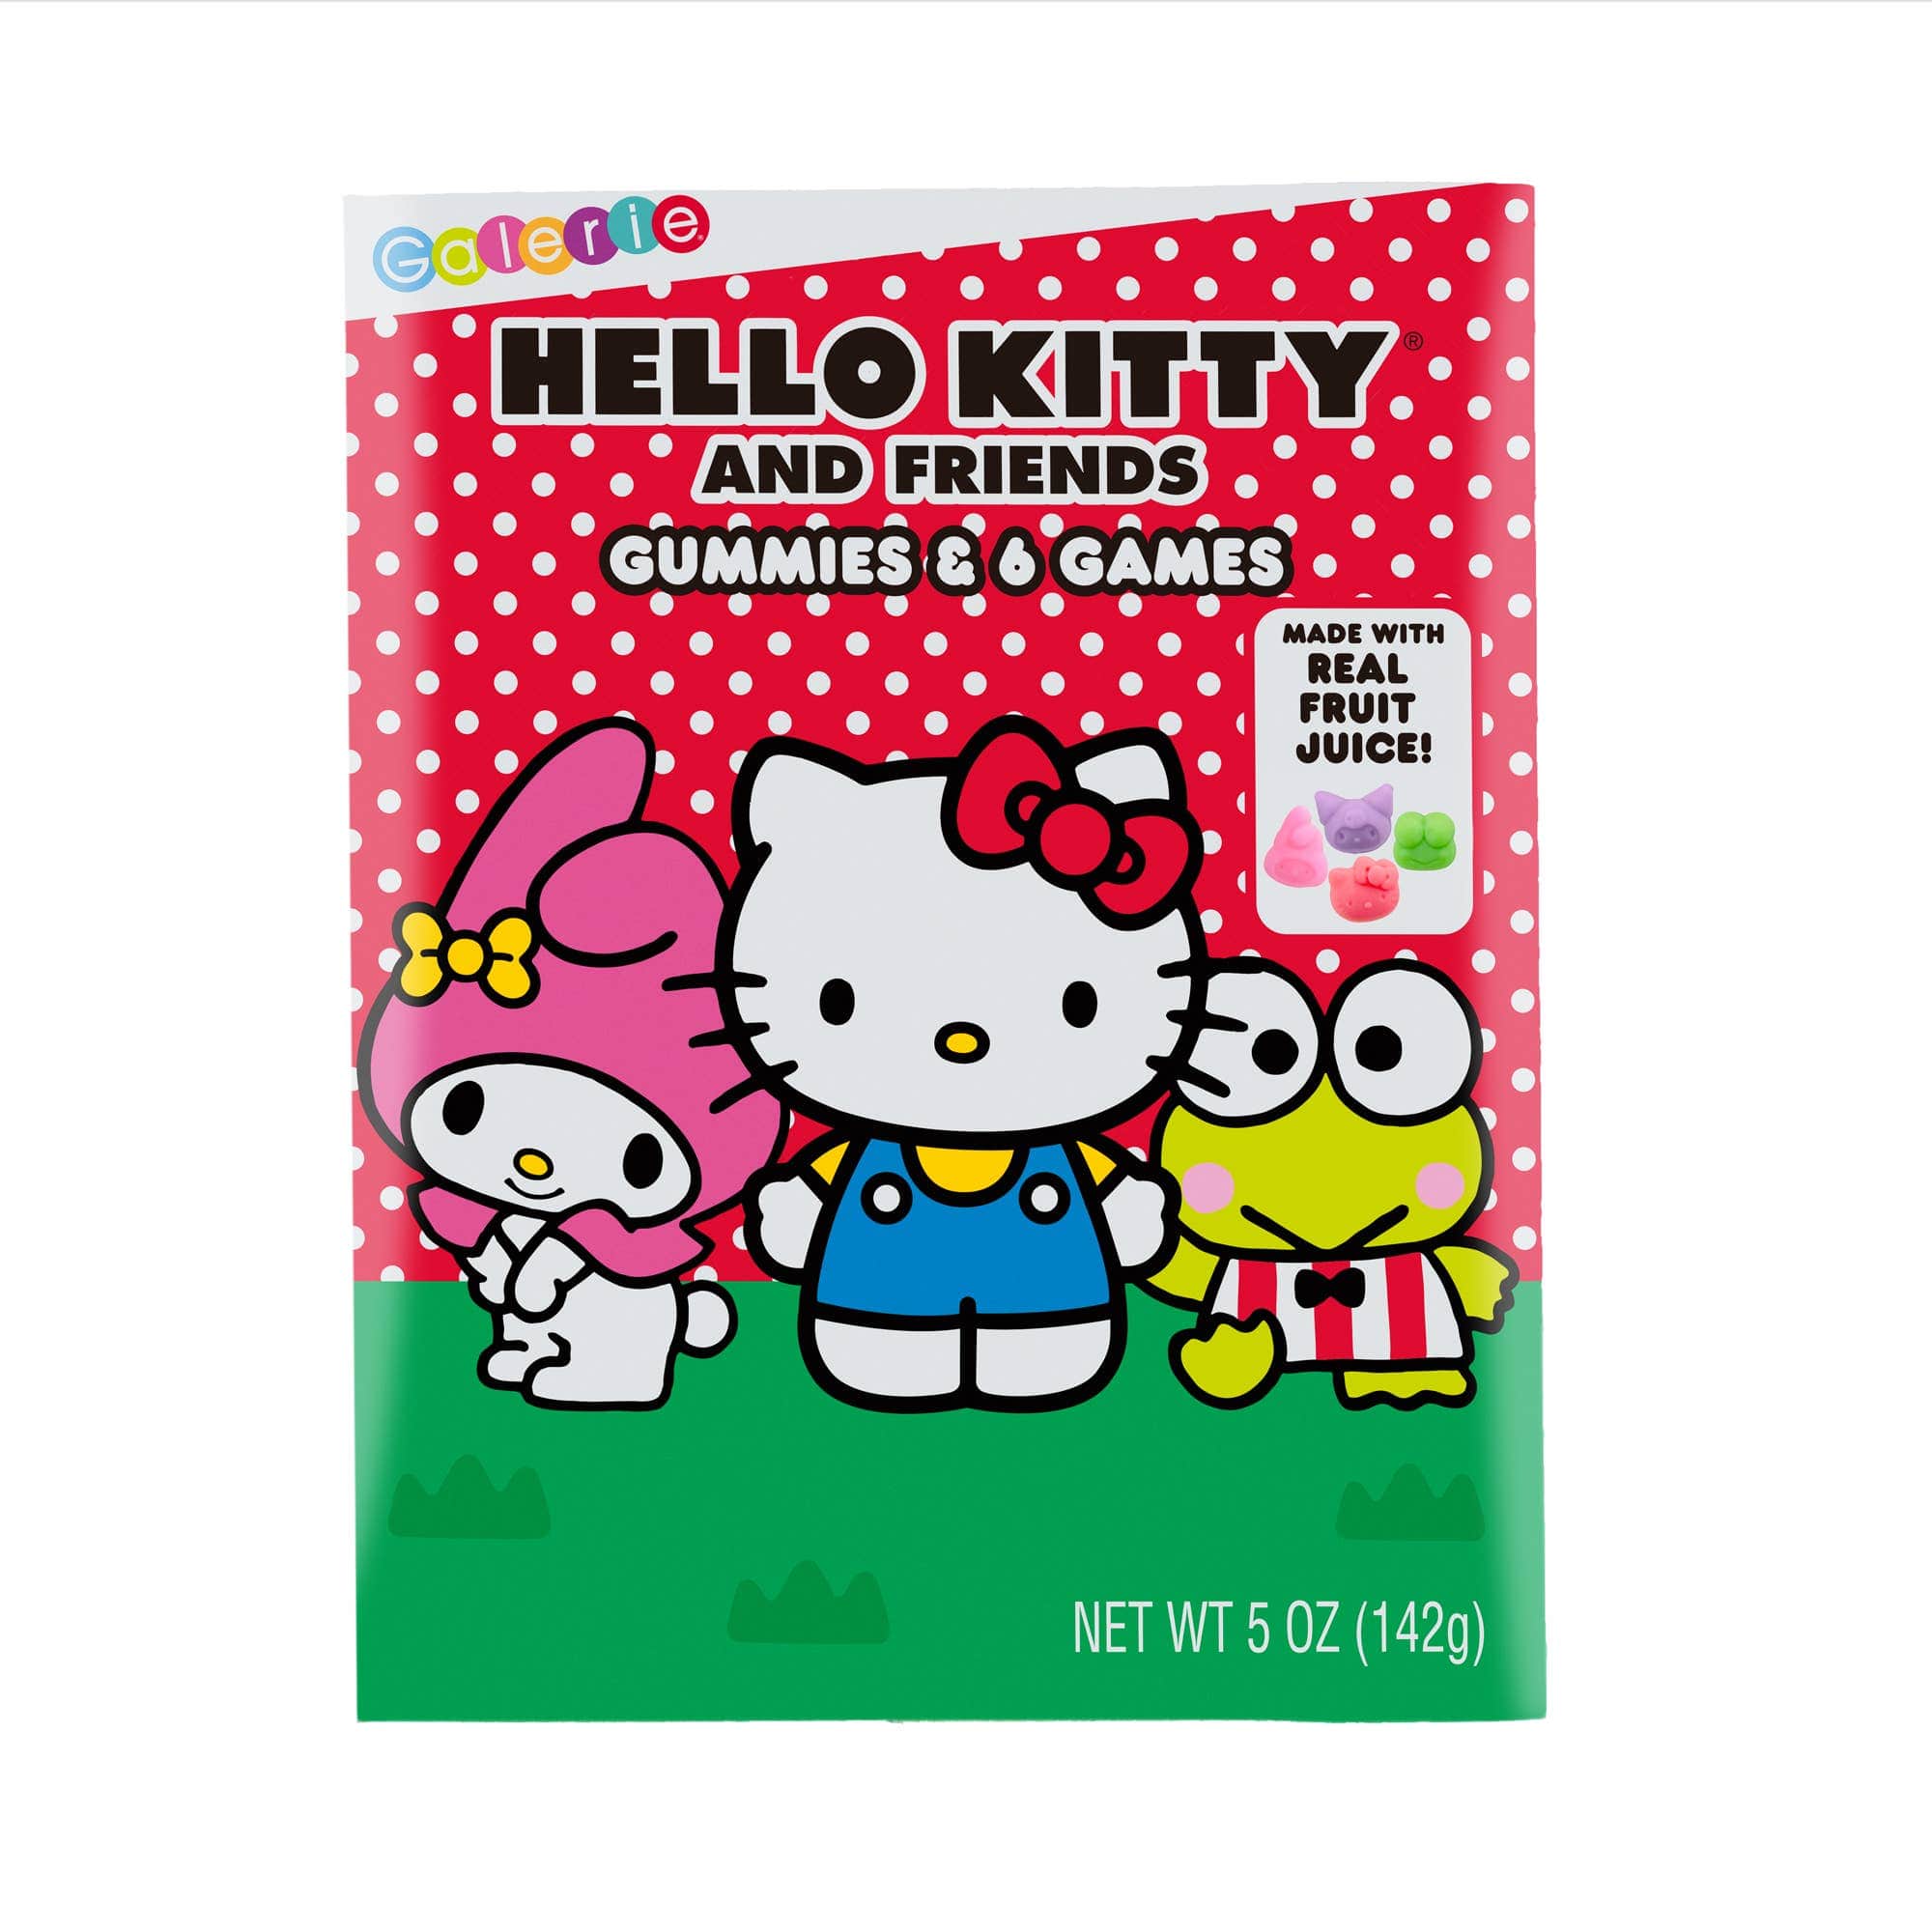 Galerie Candy and Gifts Hello Kitty Gummies & 6 Games Box 12 Ct. Case Kawaii Gifts